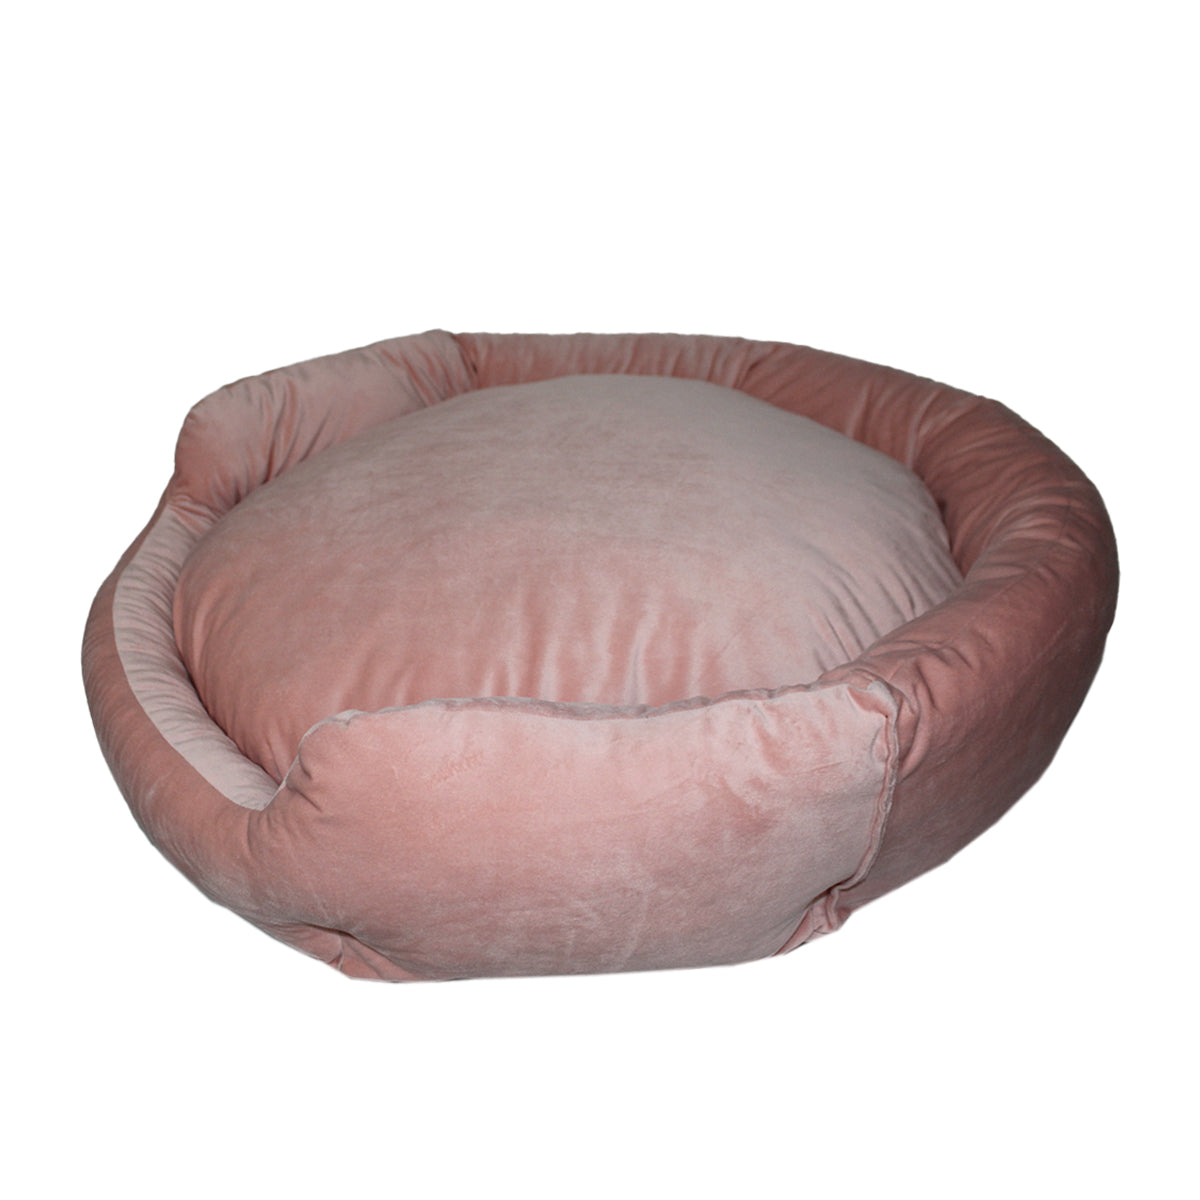 ROUND BED WITH LARGE REMOVABLE CUSHION 9646 